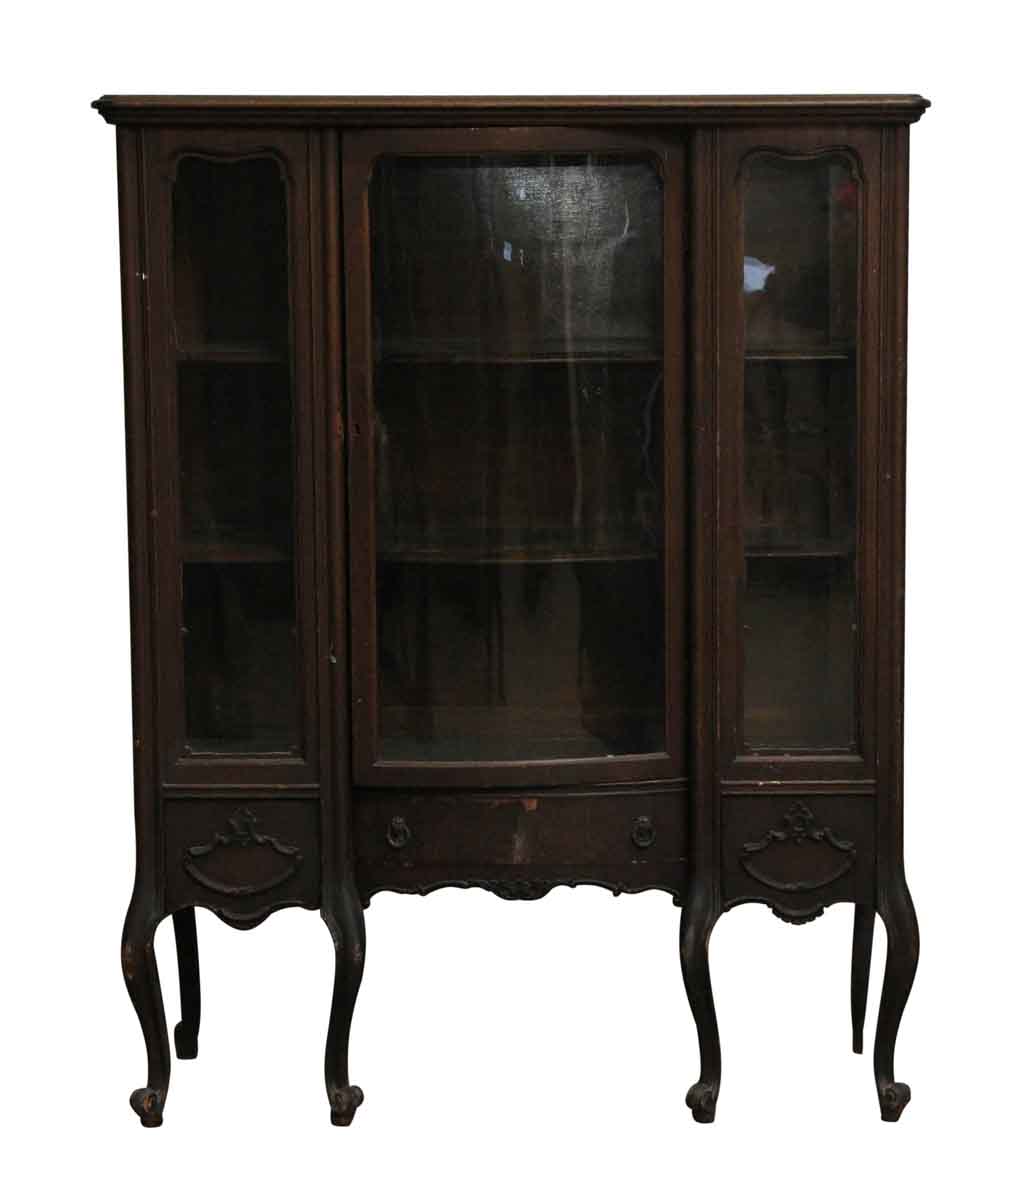 Antique Curved Leg Wooden Curio Cabinet, Pictures Of Antique Curio Cabinets In Zimbabwe